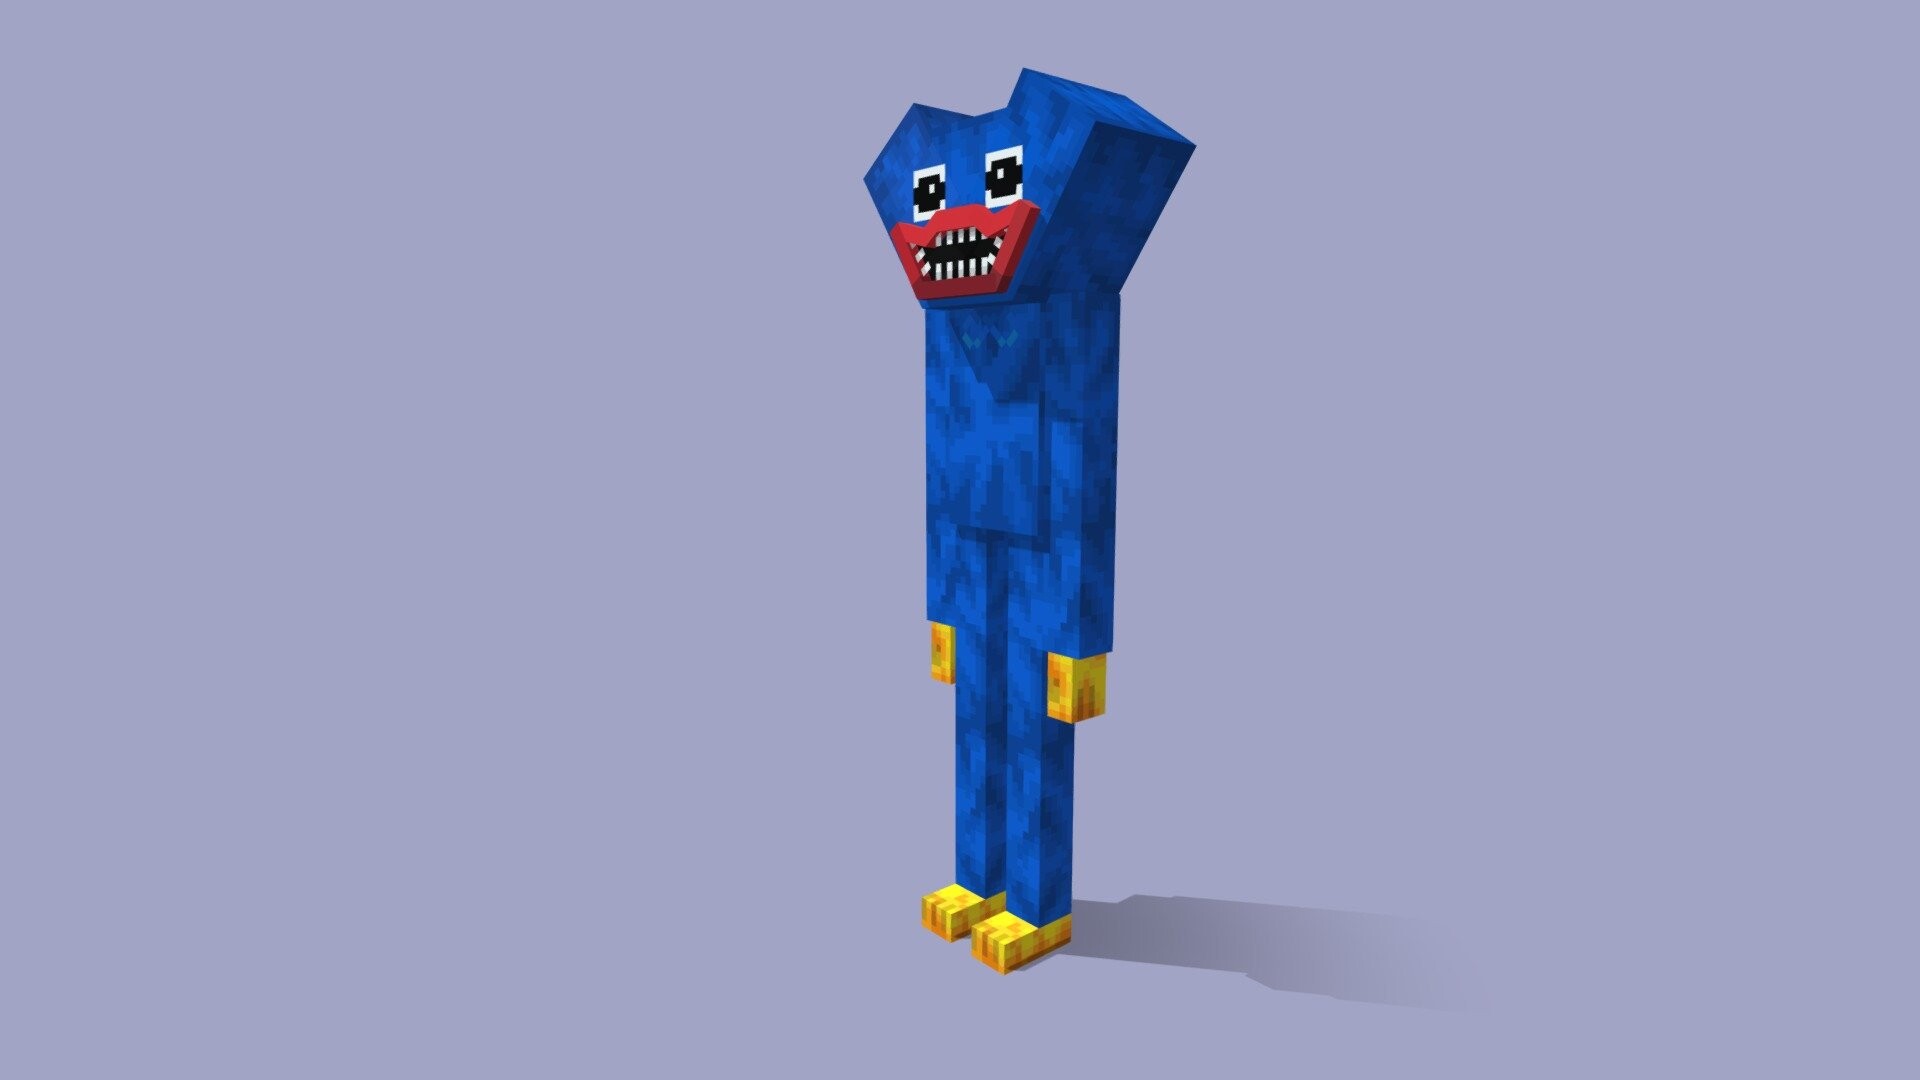 Huggy Wuggy: 3D model, Minecraft, The highest-selling toy, An enormous monkey-like creature. 1920x1080 Full HD Wallpaper.